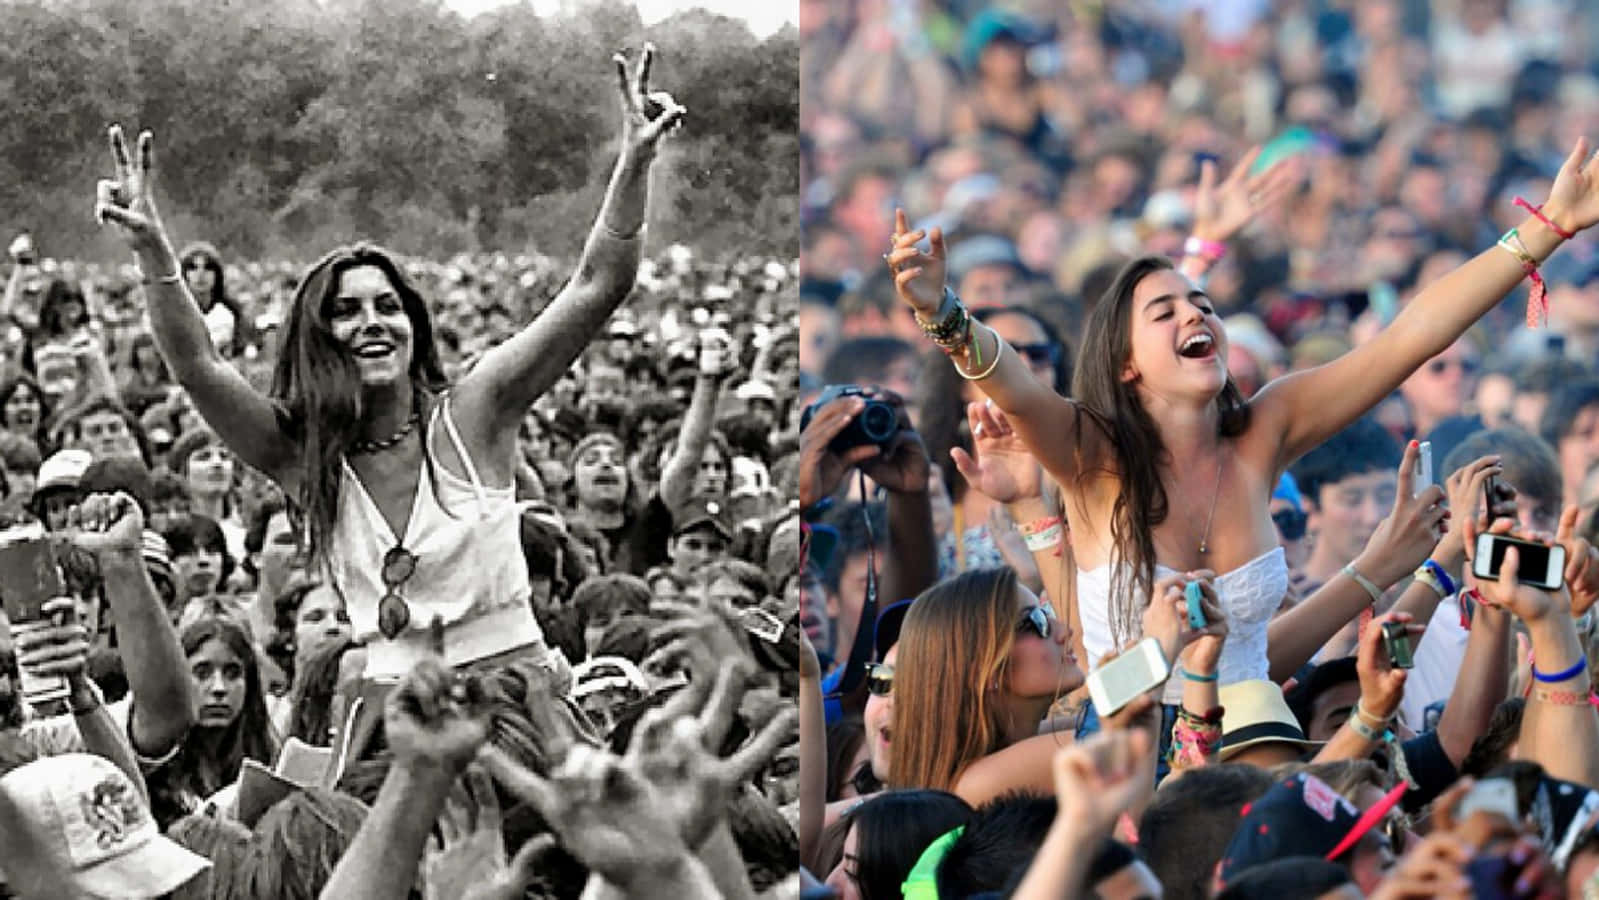 "The Summer of Love: Thousands gather for the iconic Woodstock Music Festival"